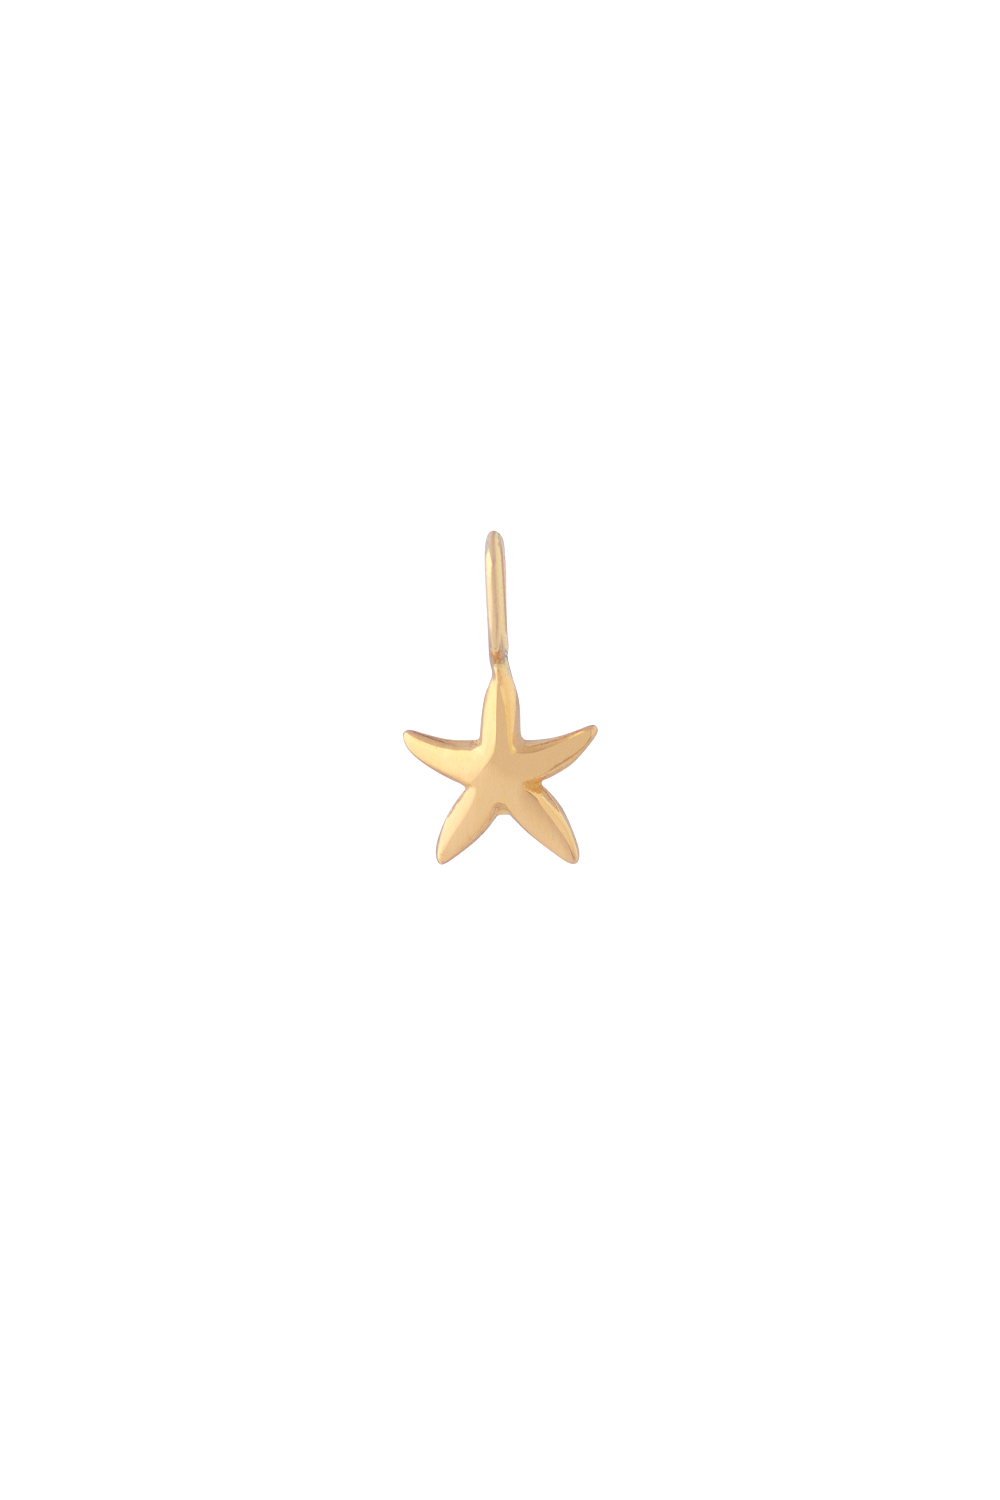 The Fine Gold You can be a Star Charm